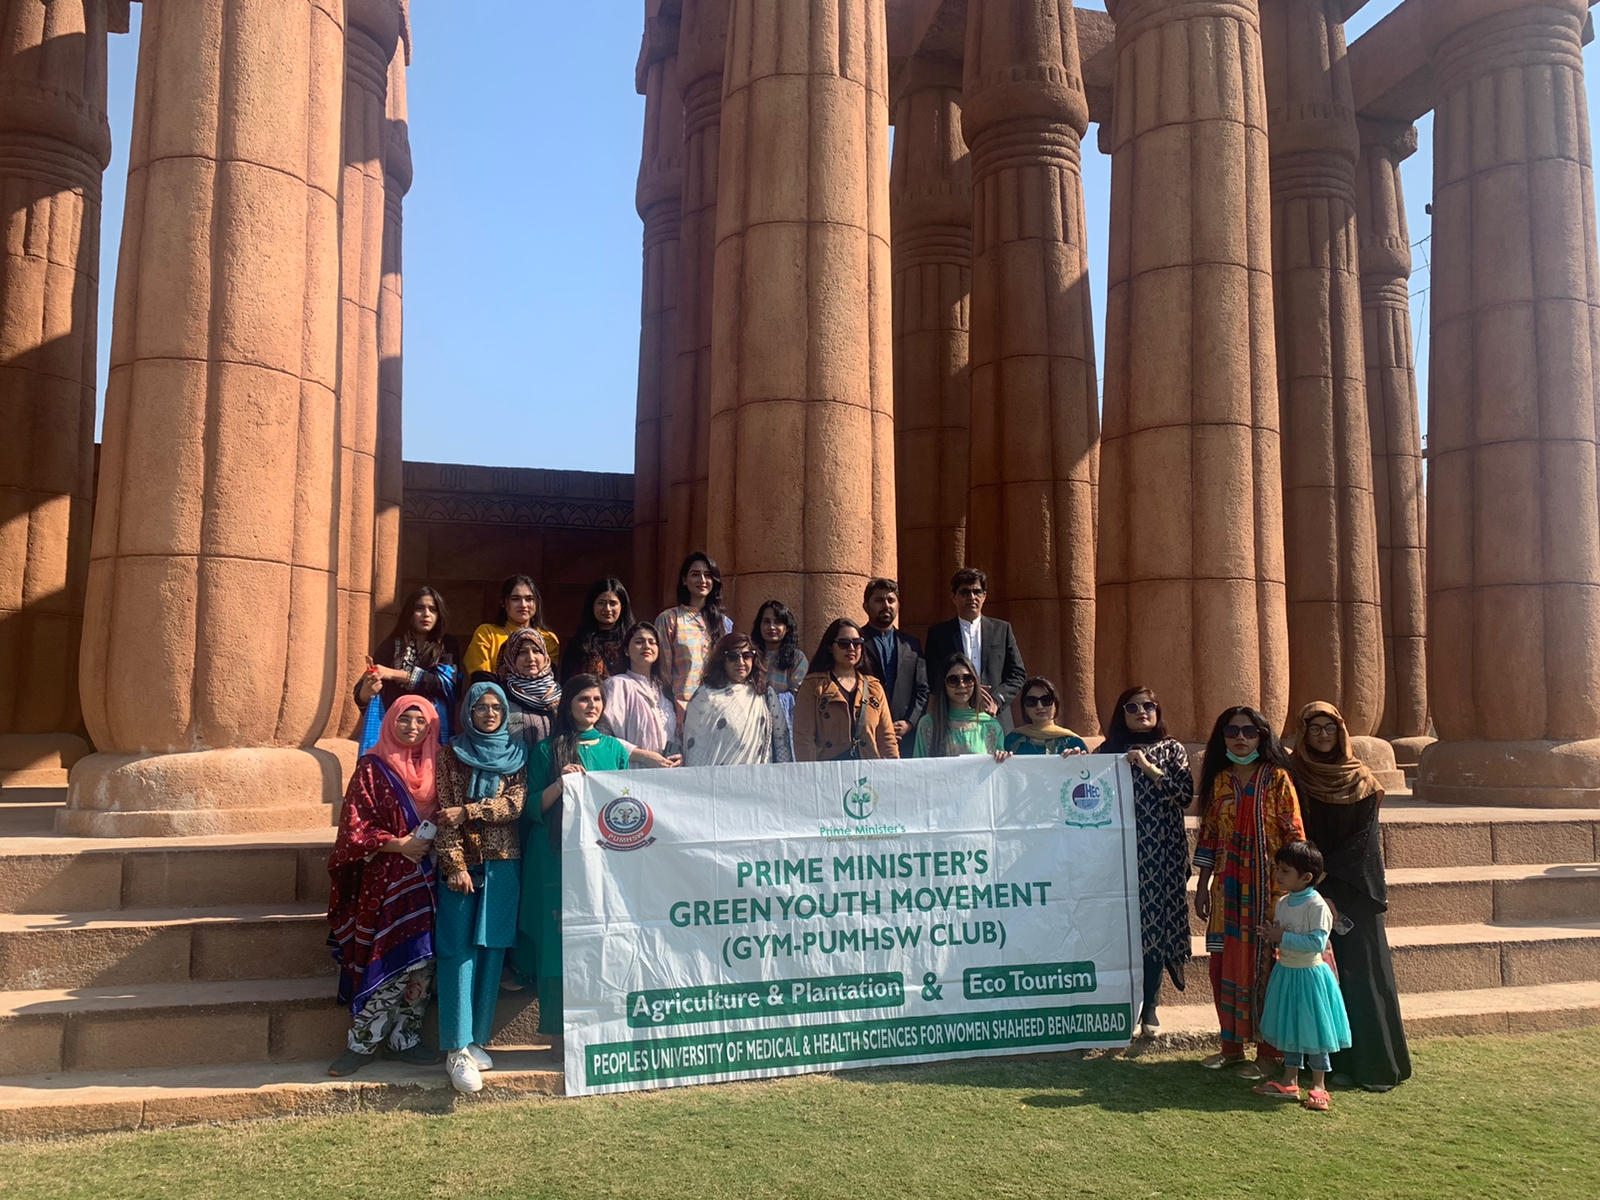 Plantation drive and Eco Tourism under the initiative of Prime Minister Green Youth Movement Club People's University of Medical and Health Sciences for Women, Nawabshah, held on Sunday, 1st January 2023.